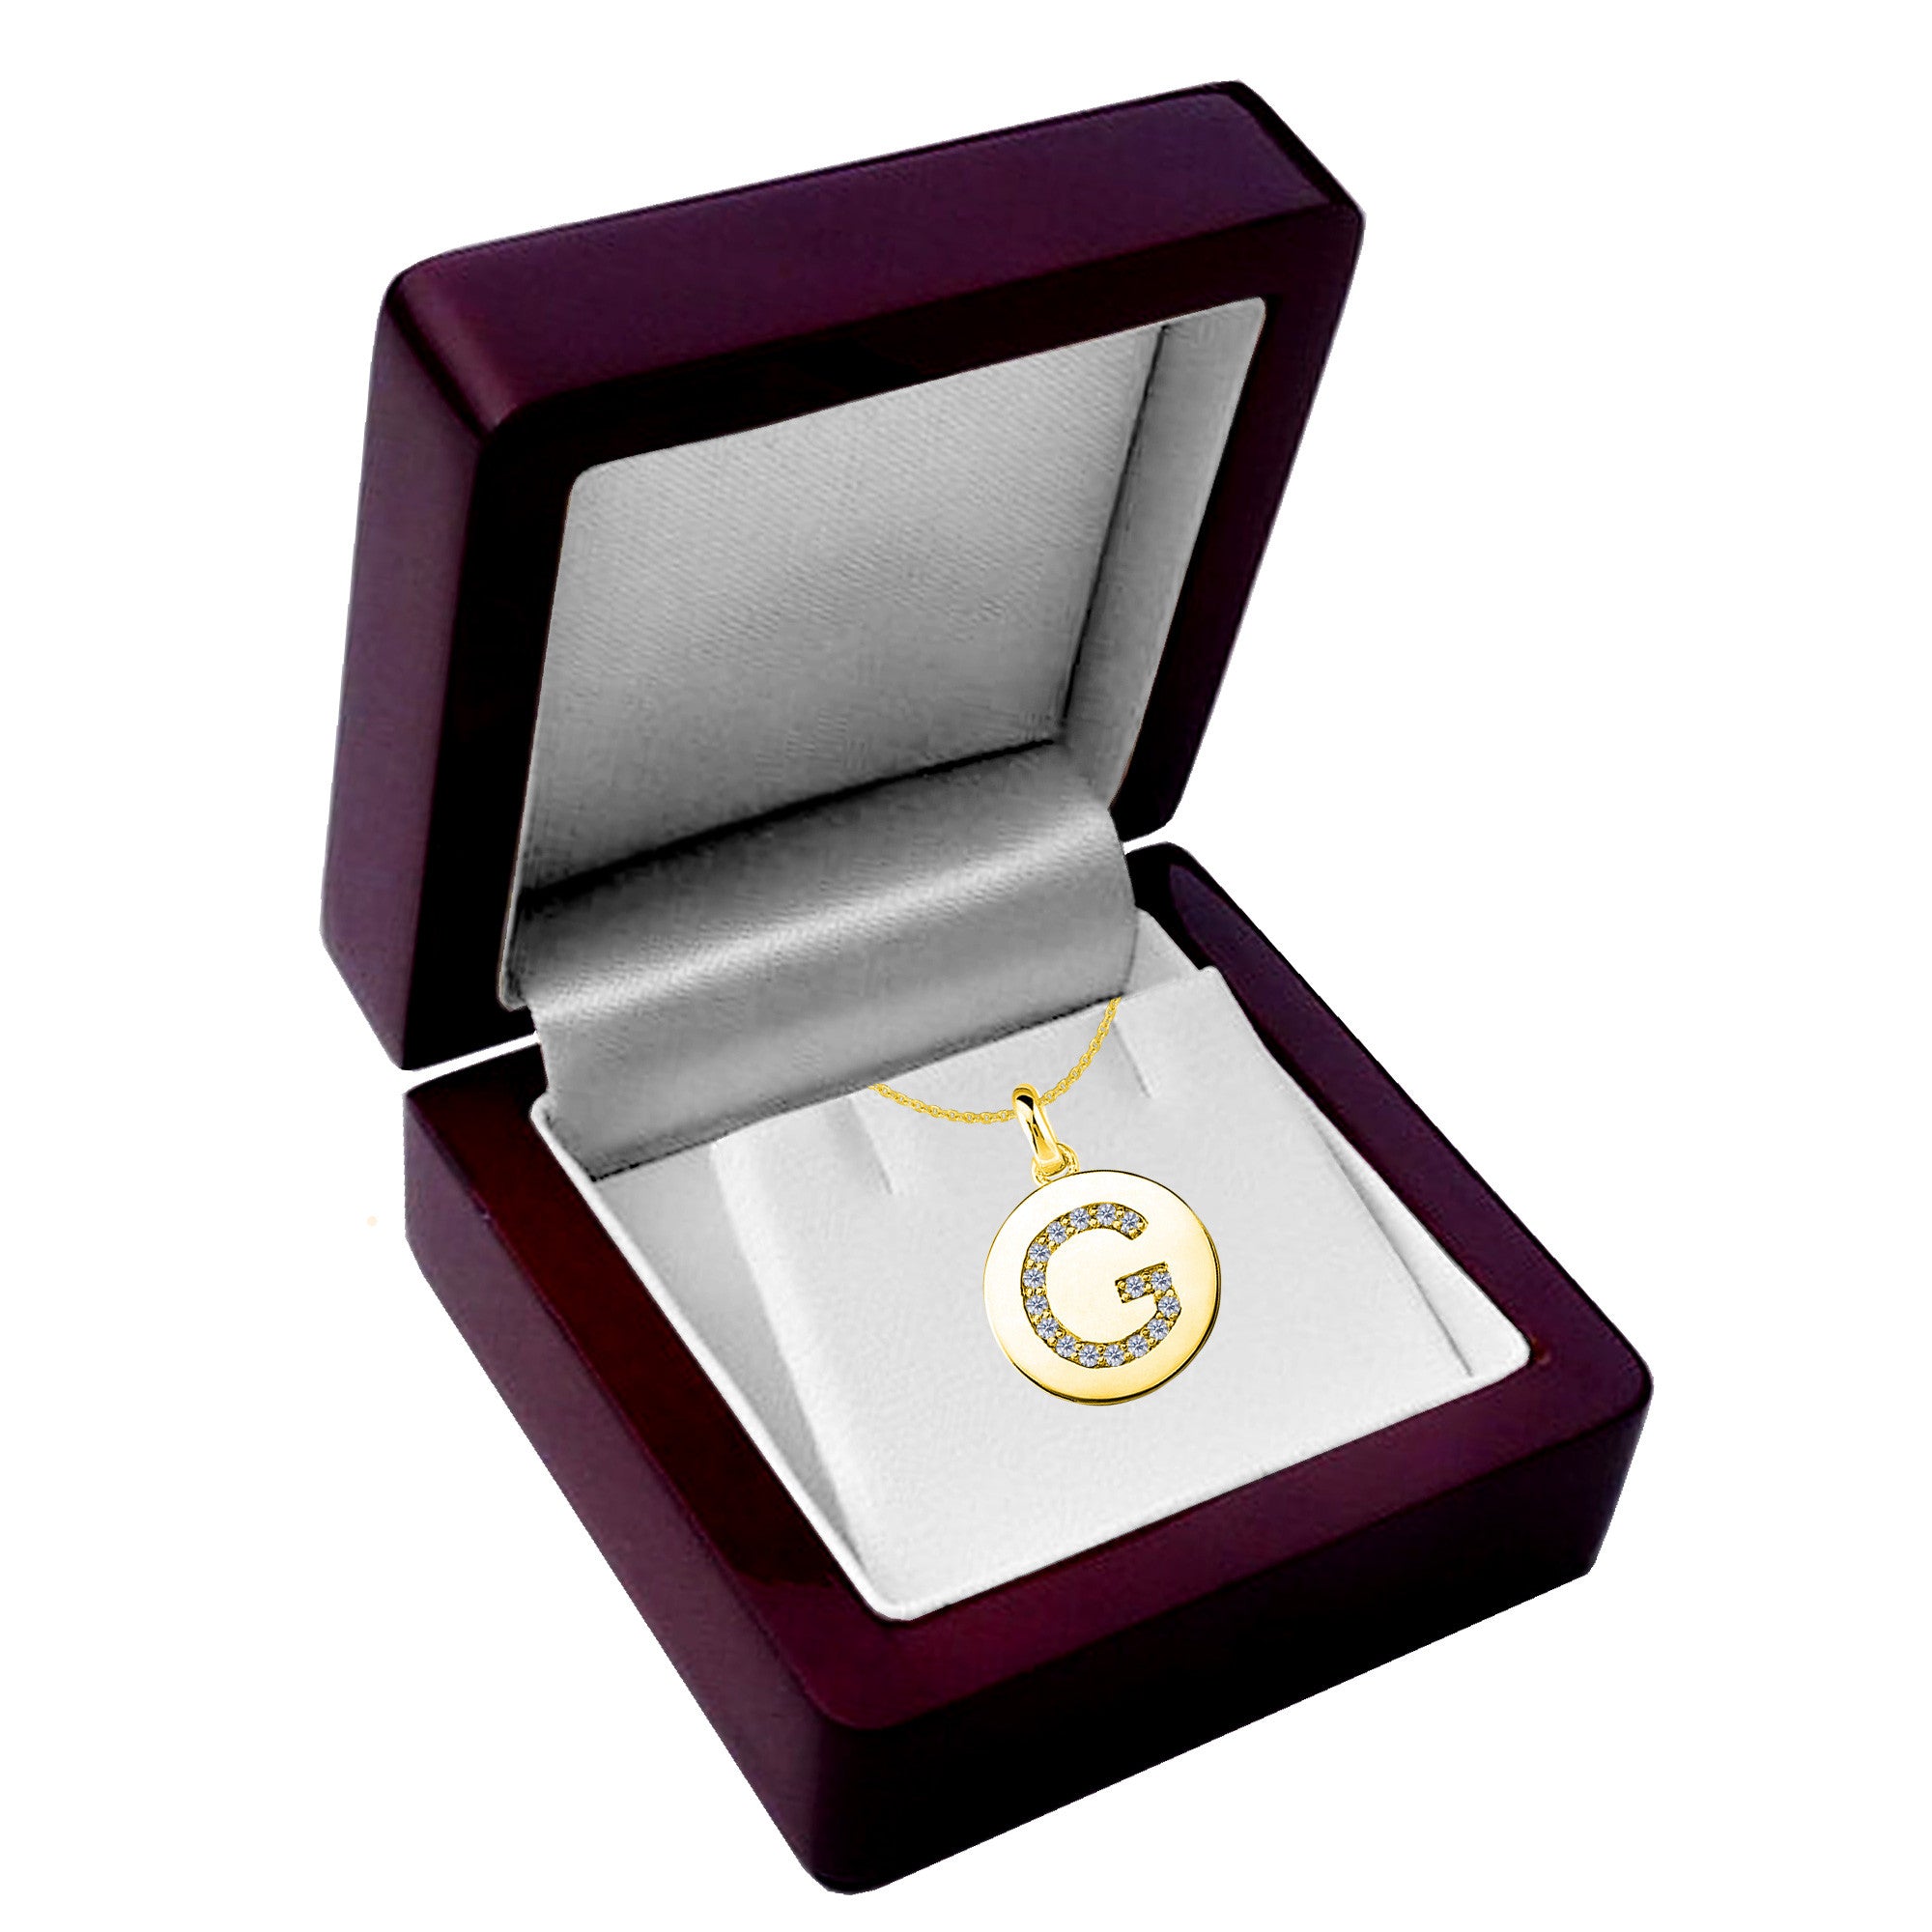 "G" Diamond Initial 14K Yellow Gold Disk Pendant (0.16ct) fine designer jewelry for men and women